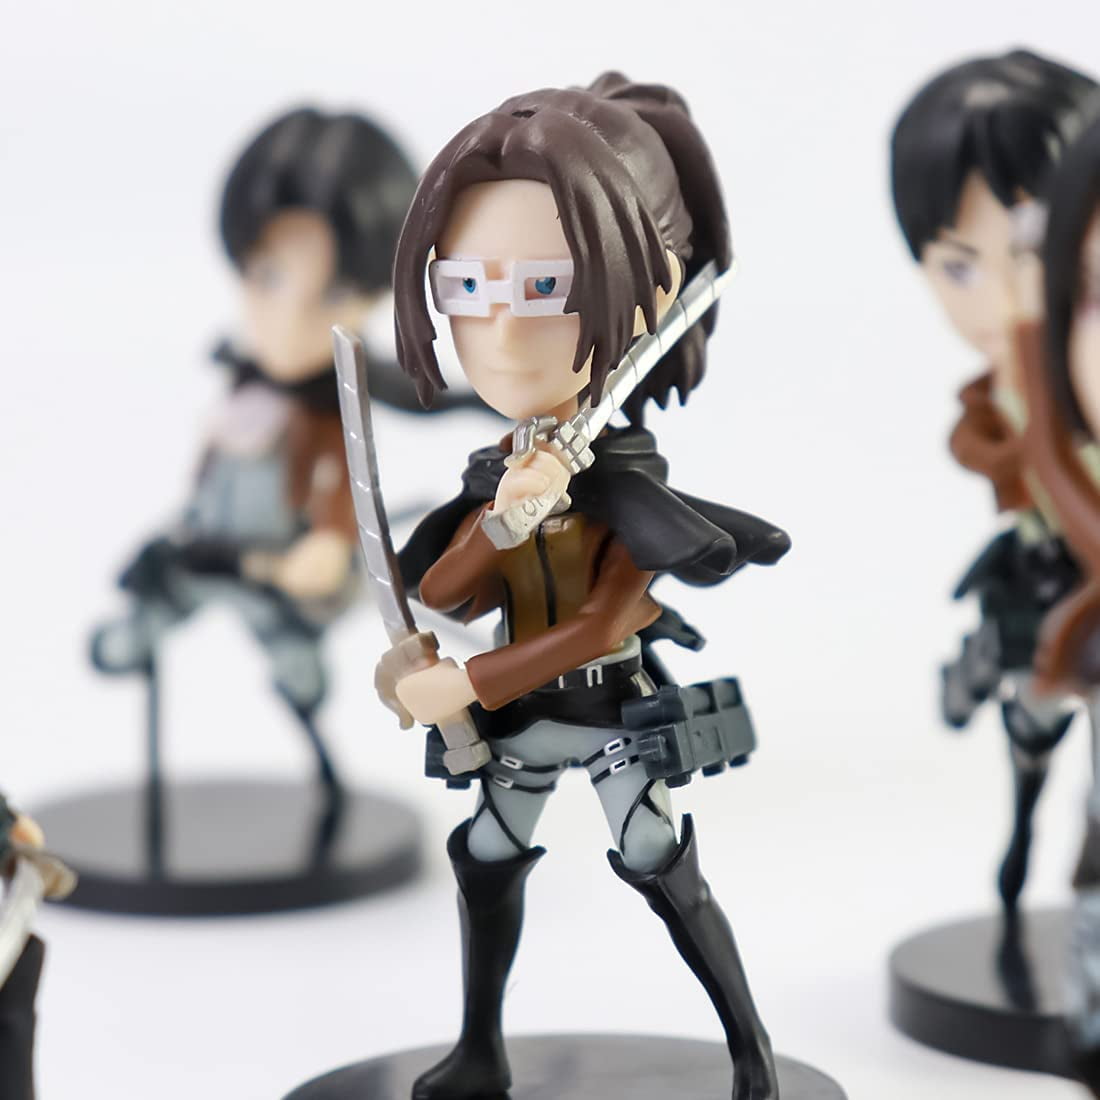 Premium SNK Figurines  Exclusive Selection at MangaKif